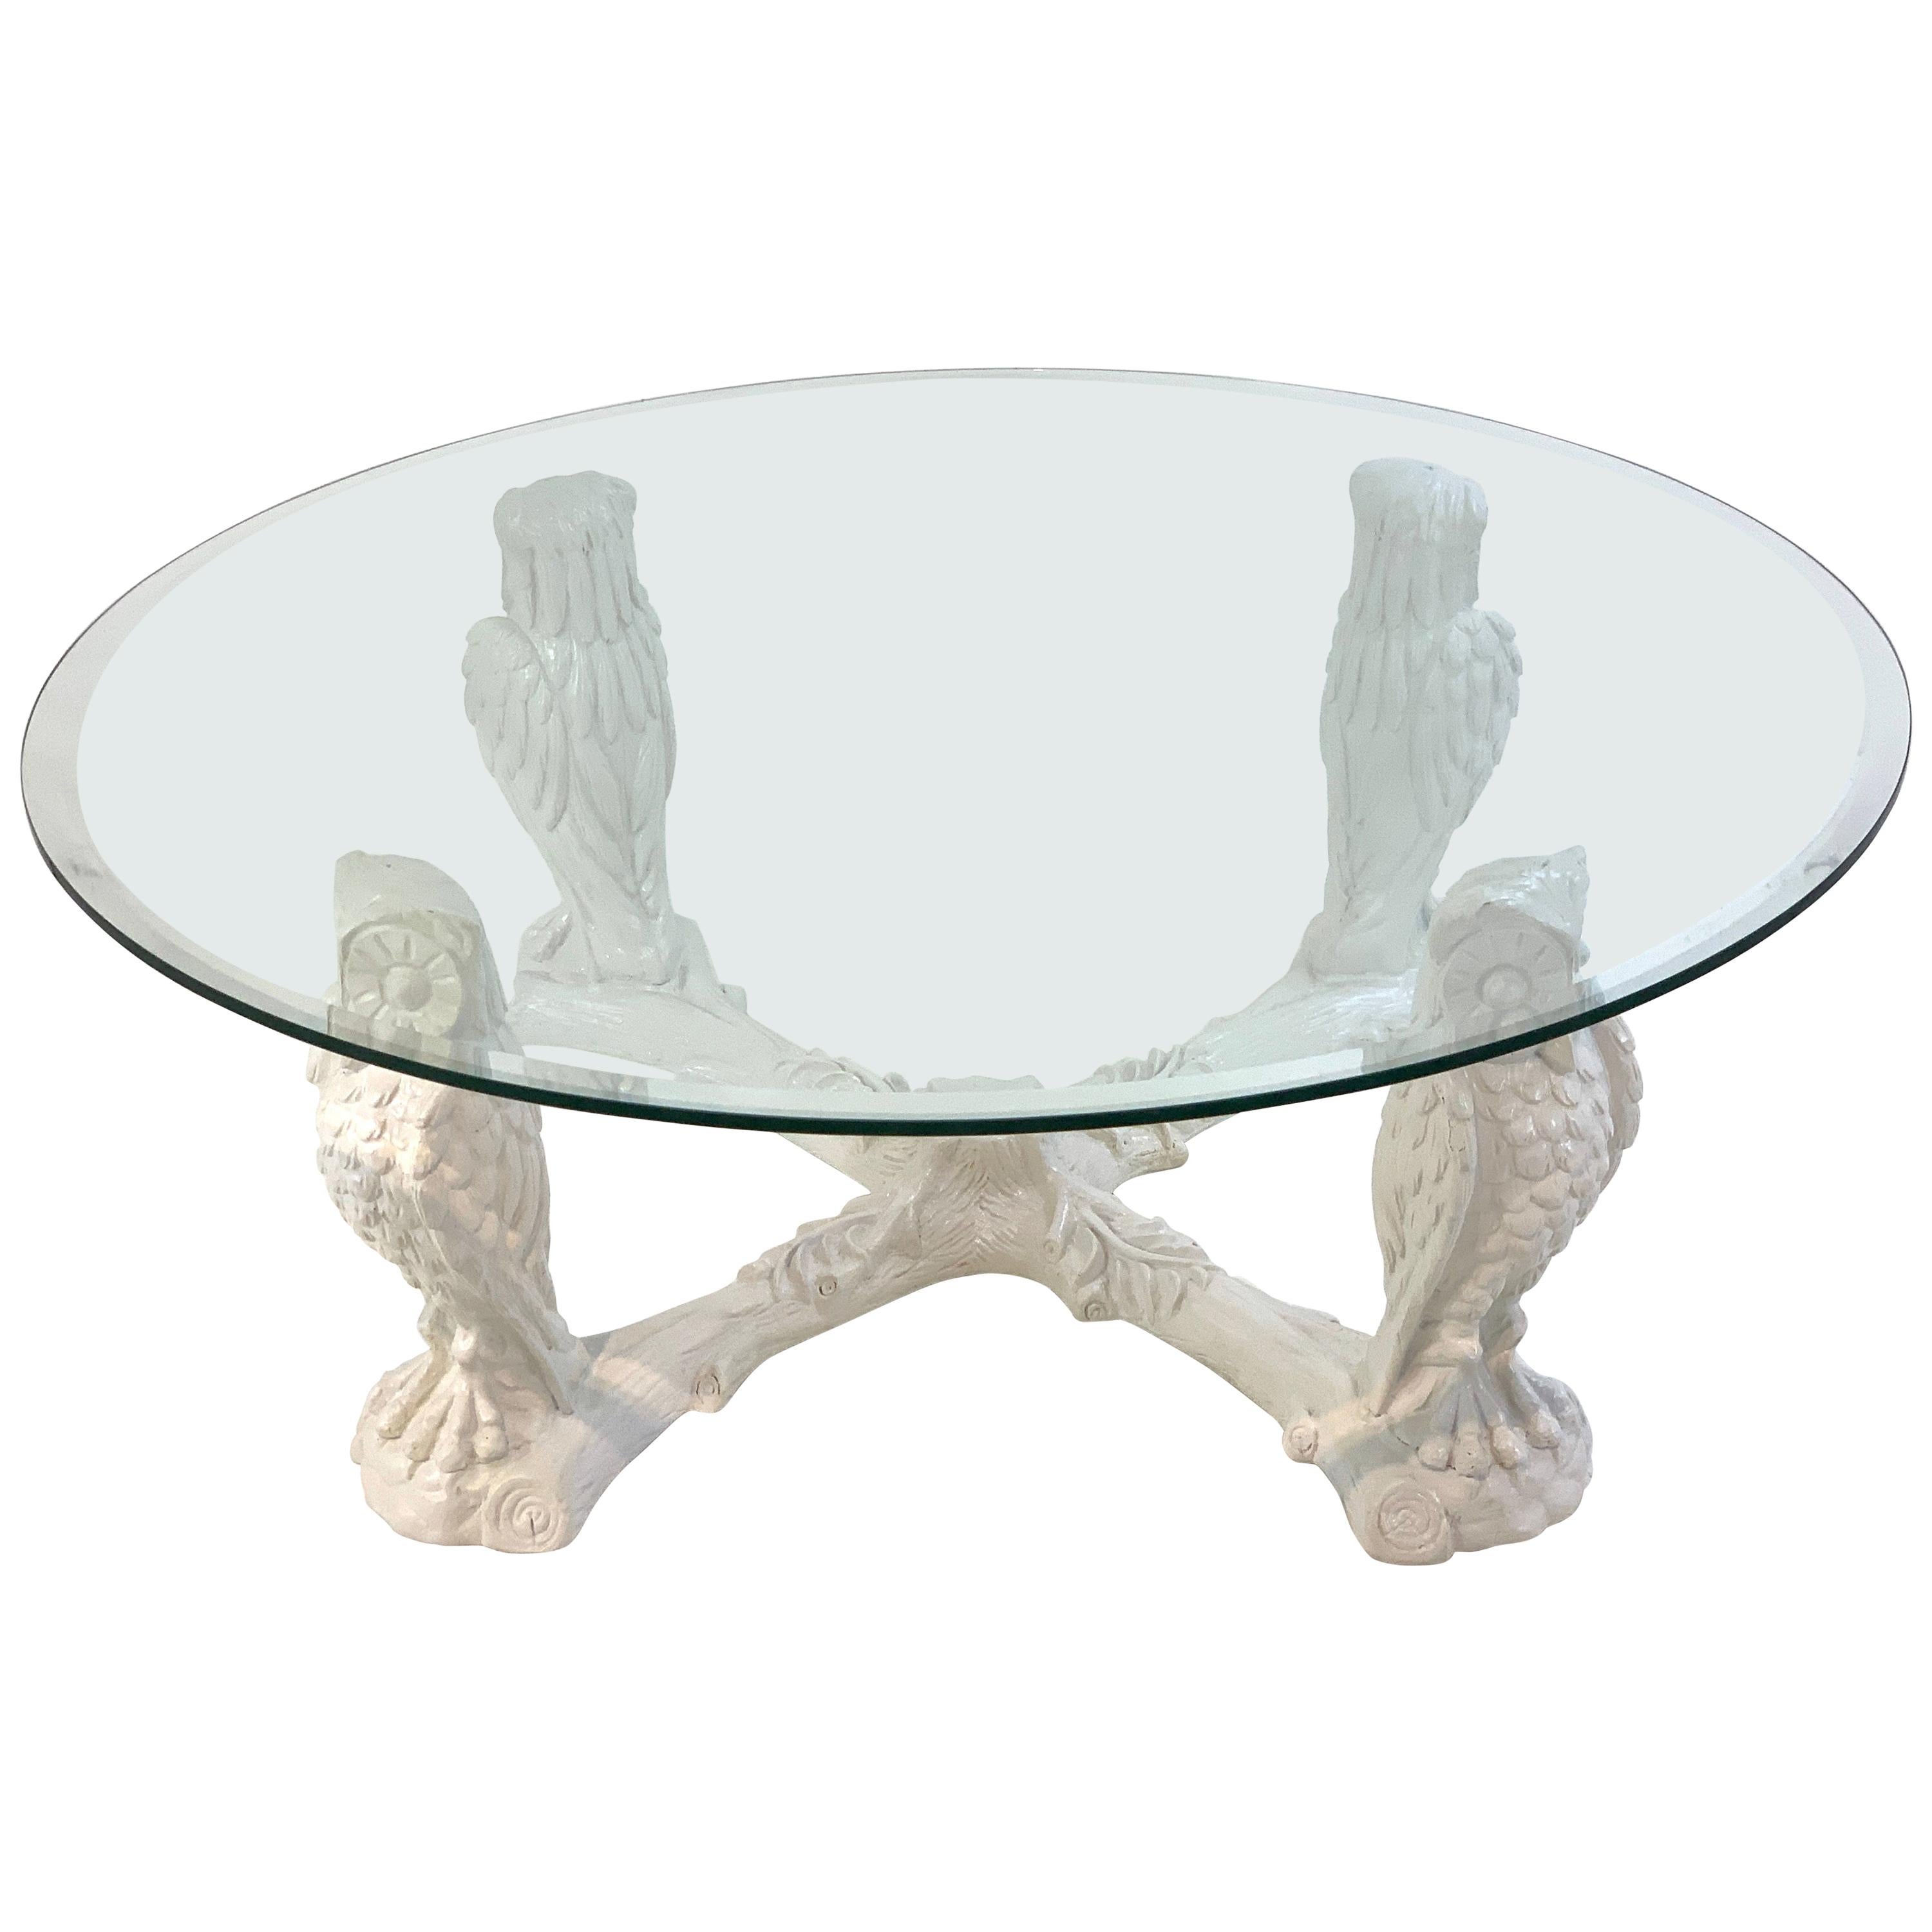 White Lacquered Owl Motif Coffee Table Base, Atrbutted to Gampel & Stoll 